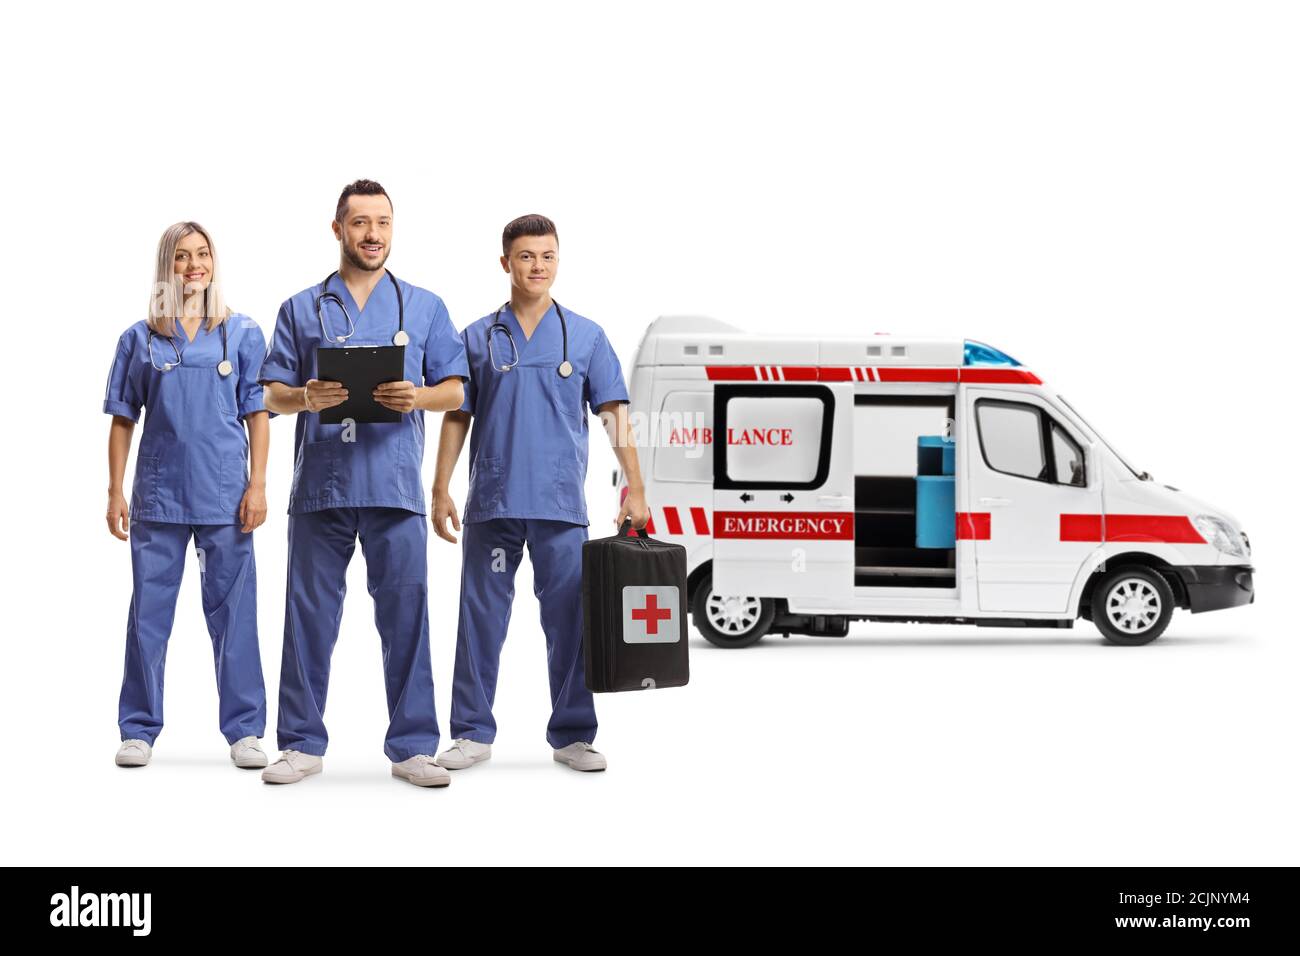 Team of medical workers in blue uniforms with an ambulance van carrying a first aid kit isolated on white background Stock Photo